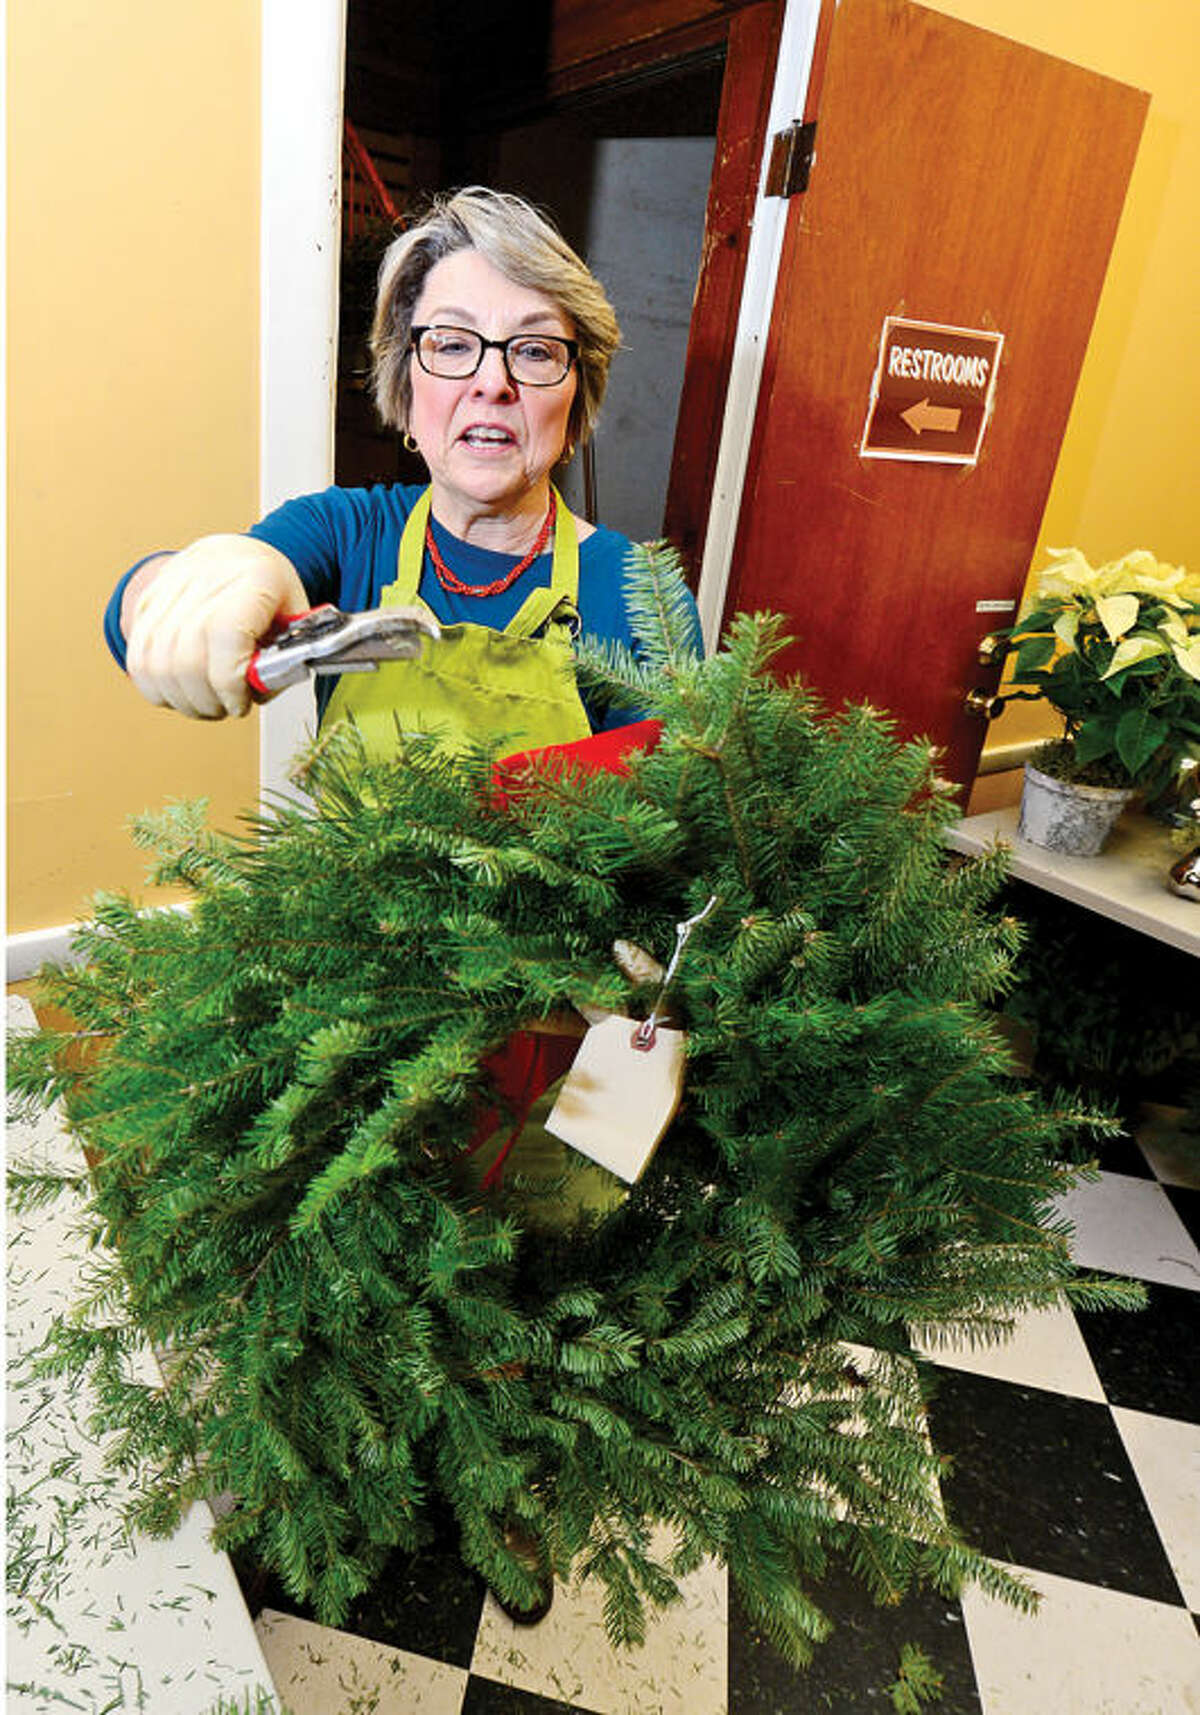 Hour photo / Erik Trautmann Rowayton Gardeners Club members including Nancy Schlater create one-of-a-kind wreaths, boxwoods trees and festive table arrangements for their annual christmas fair this Saturday.